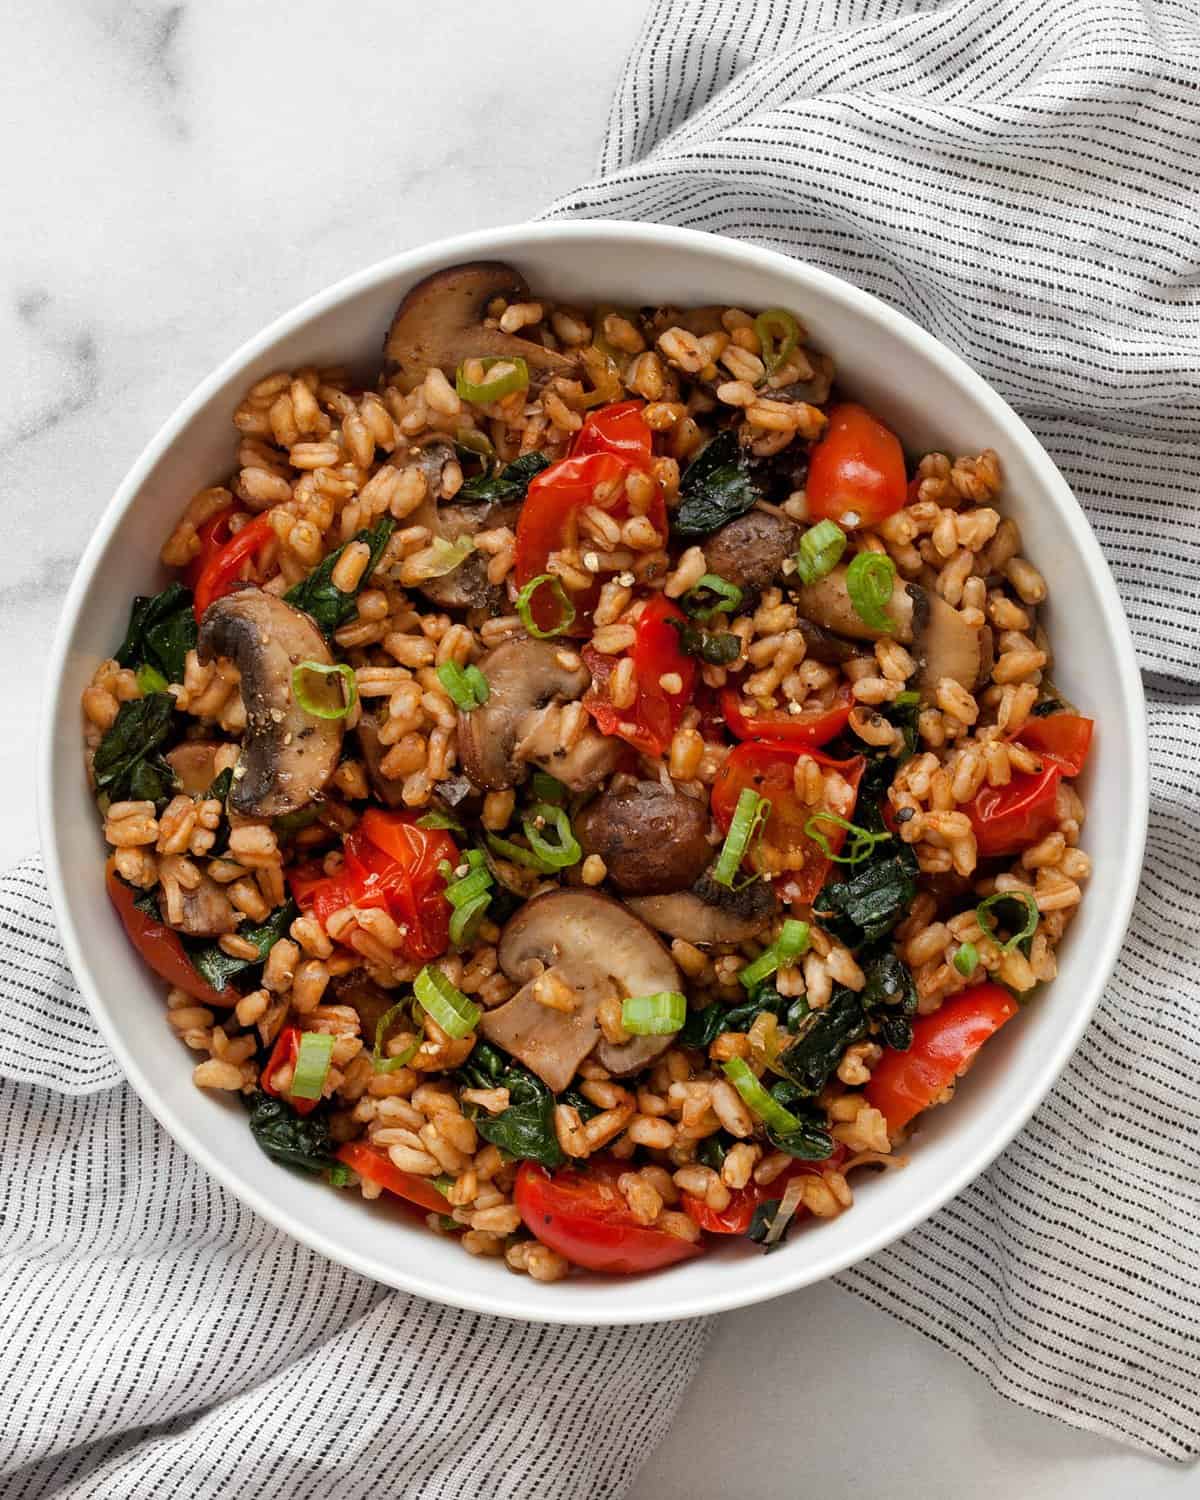 Mushroom farro with tomatoes and kale in a bowl.